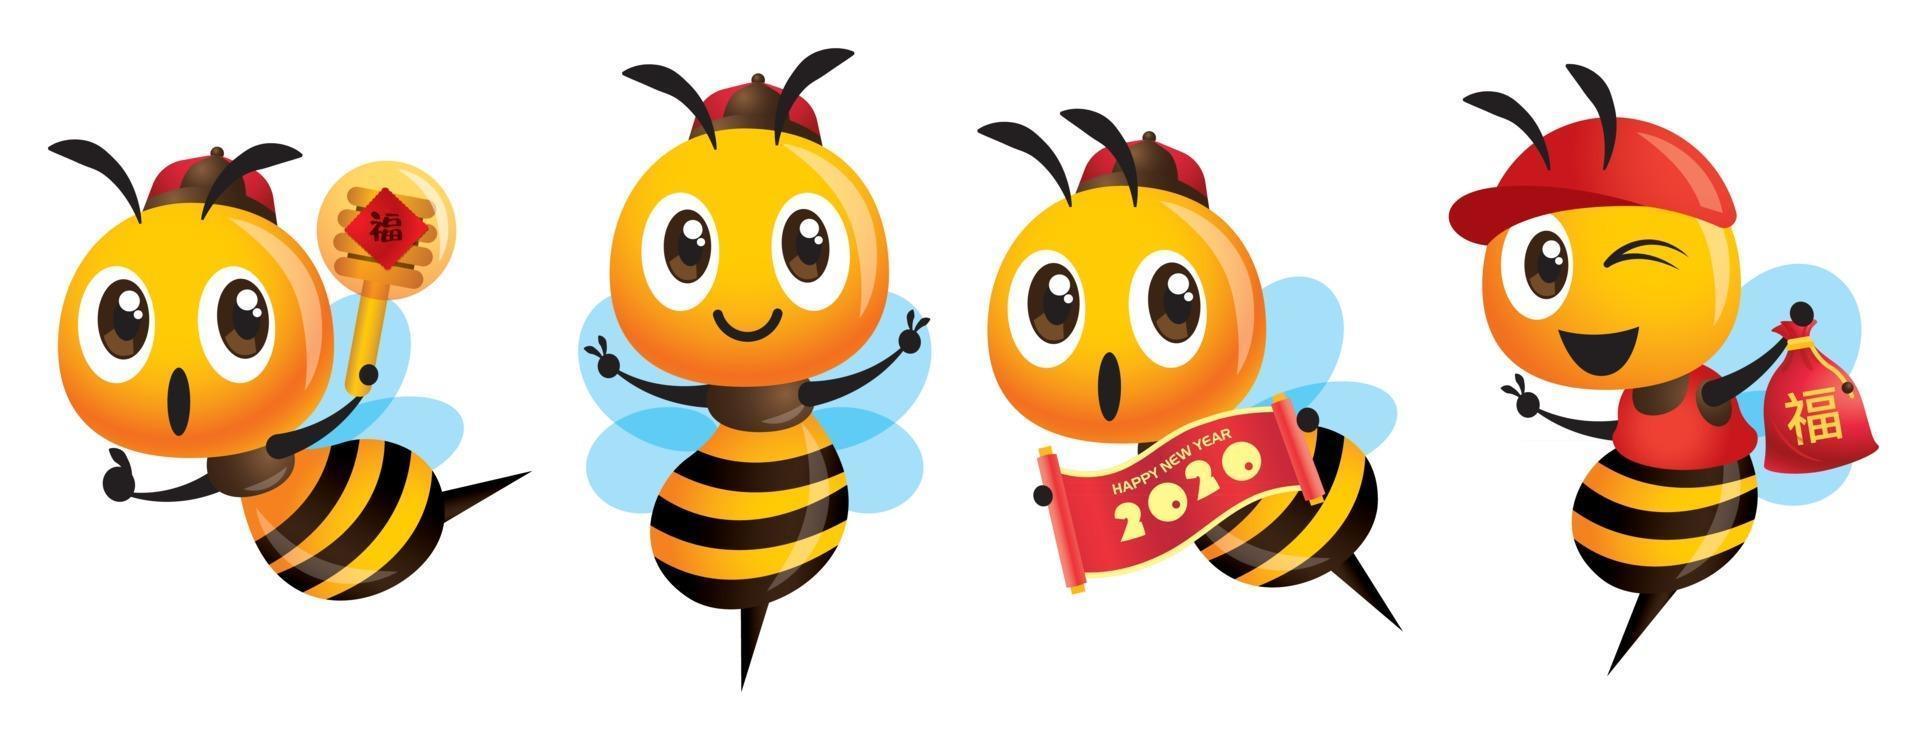 Cartoon cute bee mascot set with Chinese cap celebrating Chinese New Year vector